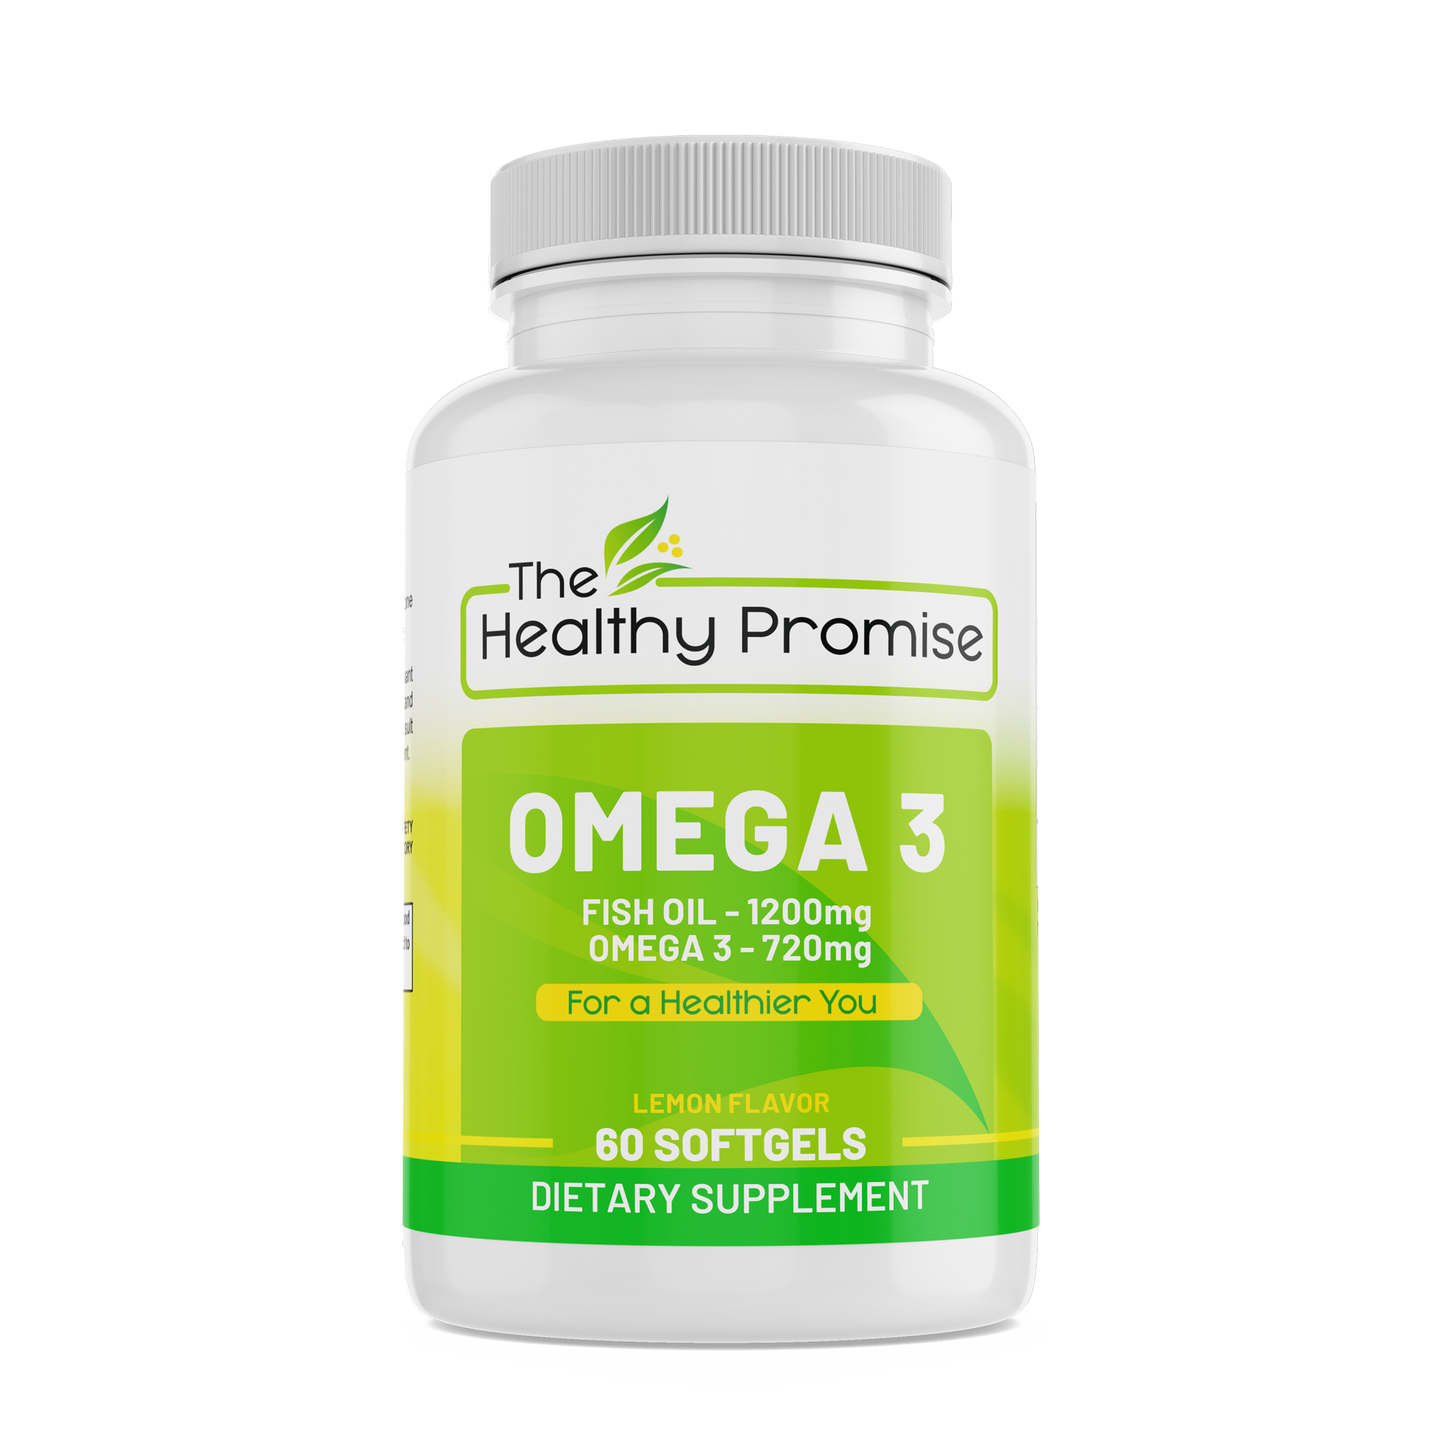 the healthy promise omega 3 fish oil dietary supplement bottle front view